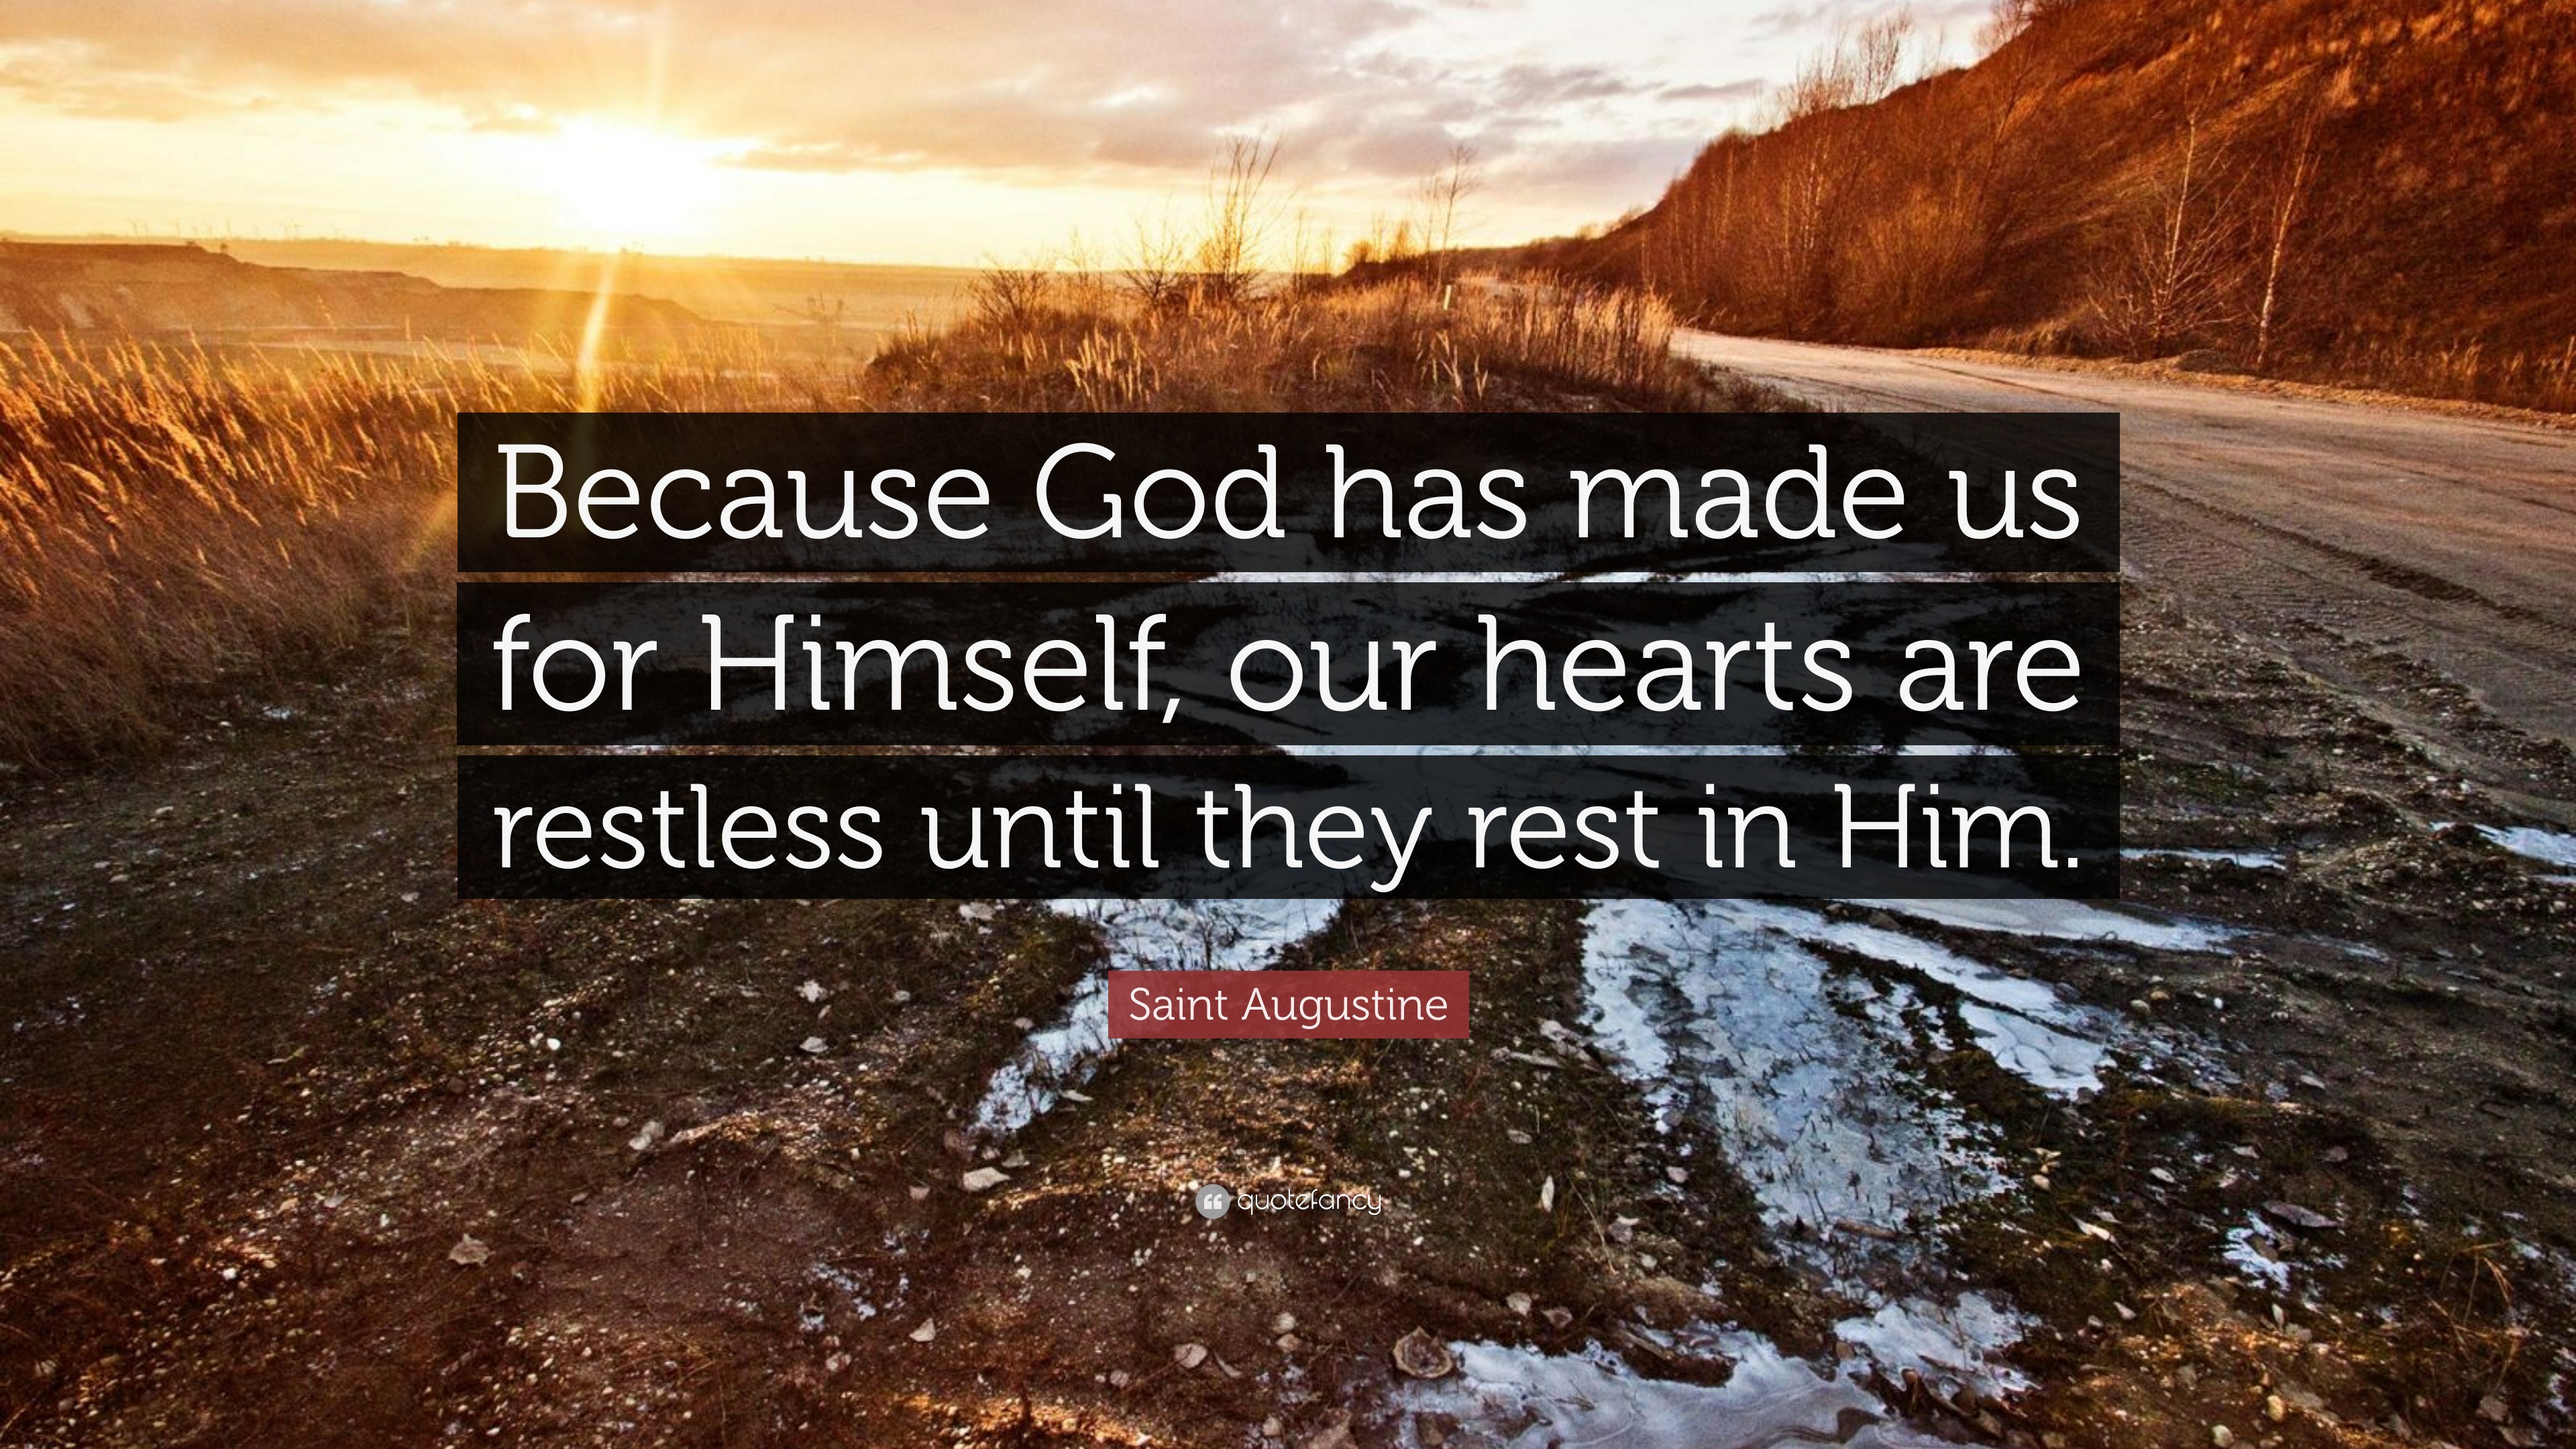 Saint Augustine Quote: “Because God has made us for Himself, our hearts